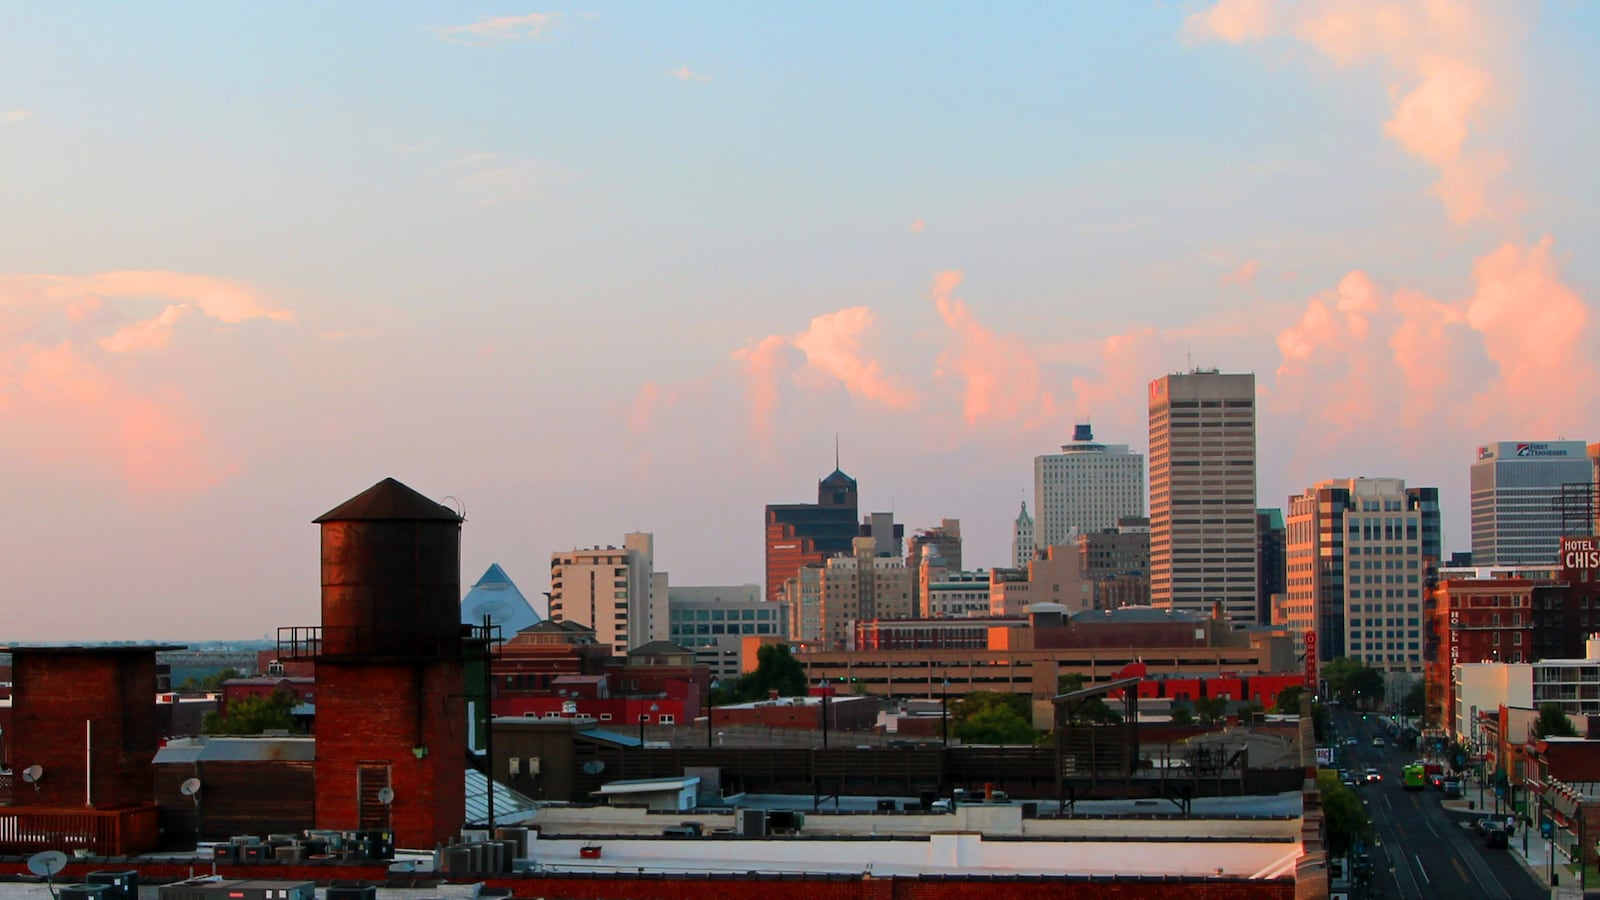 Known as the Bluff City, Memphis is Tennessee's most populated city.